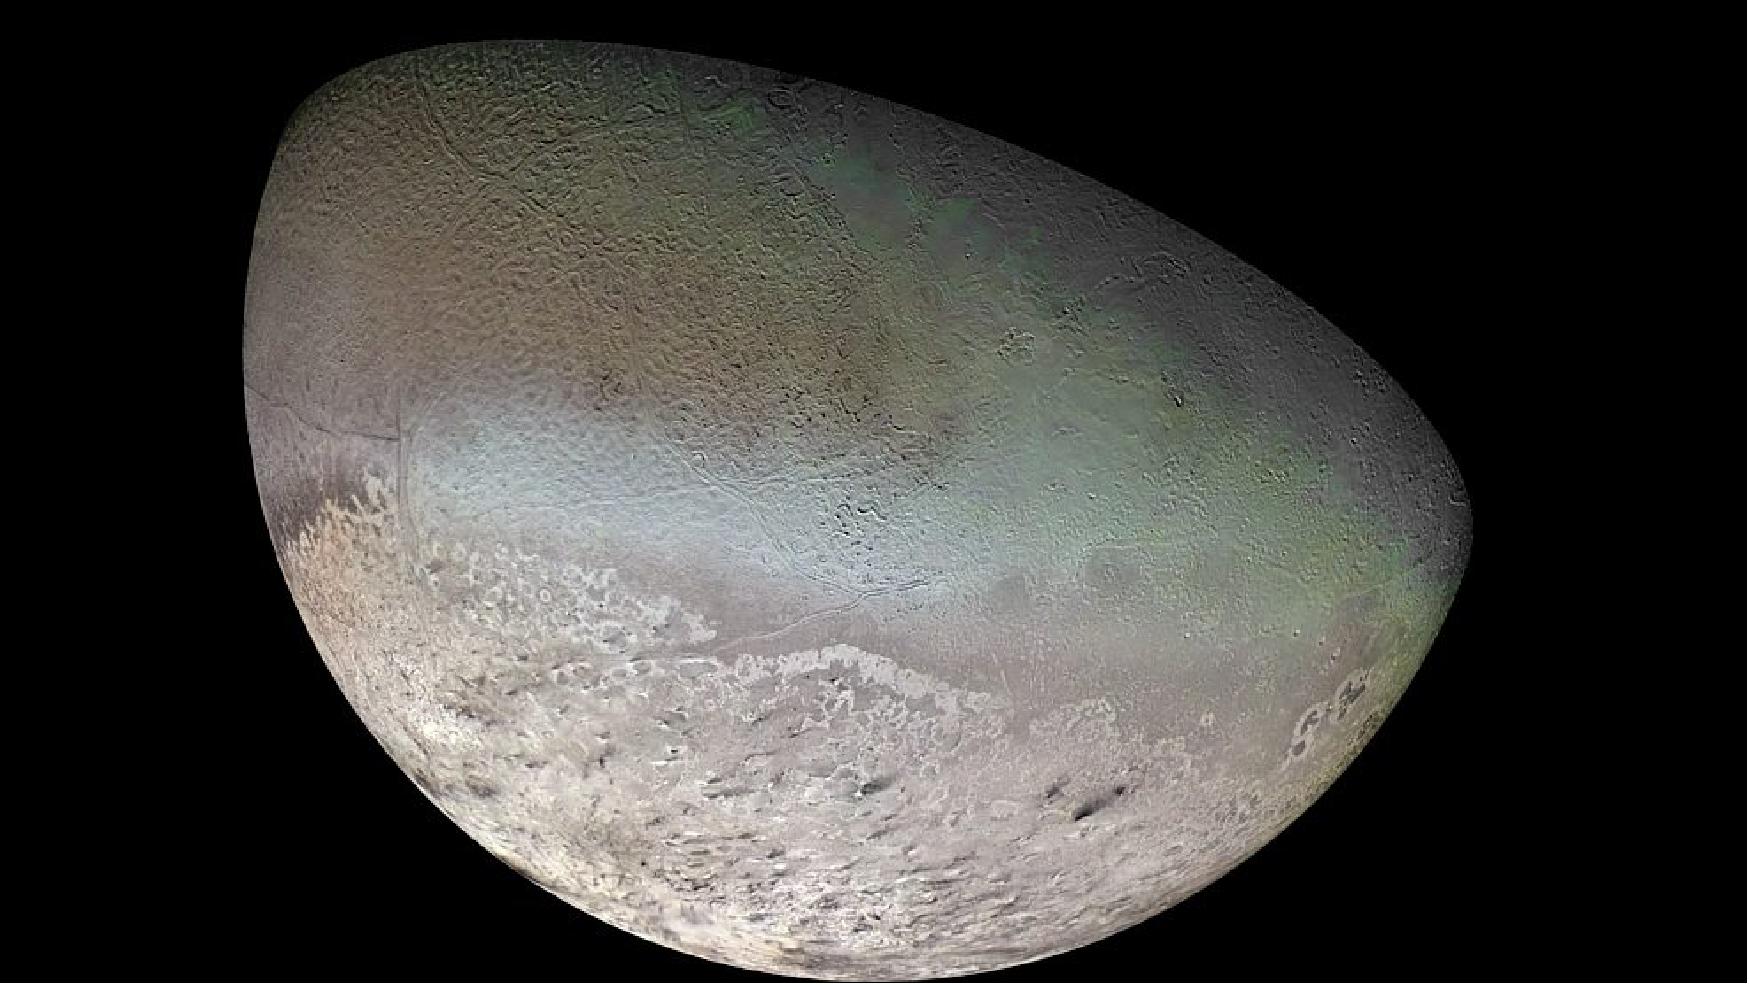 Figure 24: This global color mosaic of Neptune's moon Triton, likely a captured KBO, was taken in 1989 by Voyager 2 during its flyby of the Neptune system. Triton is by far the largest satellite of Neptune (image credits: NASA/JPL/USGS)